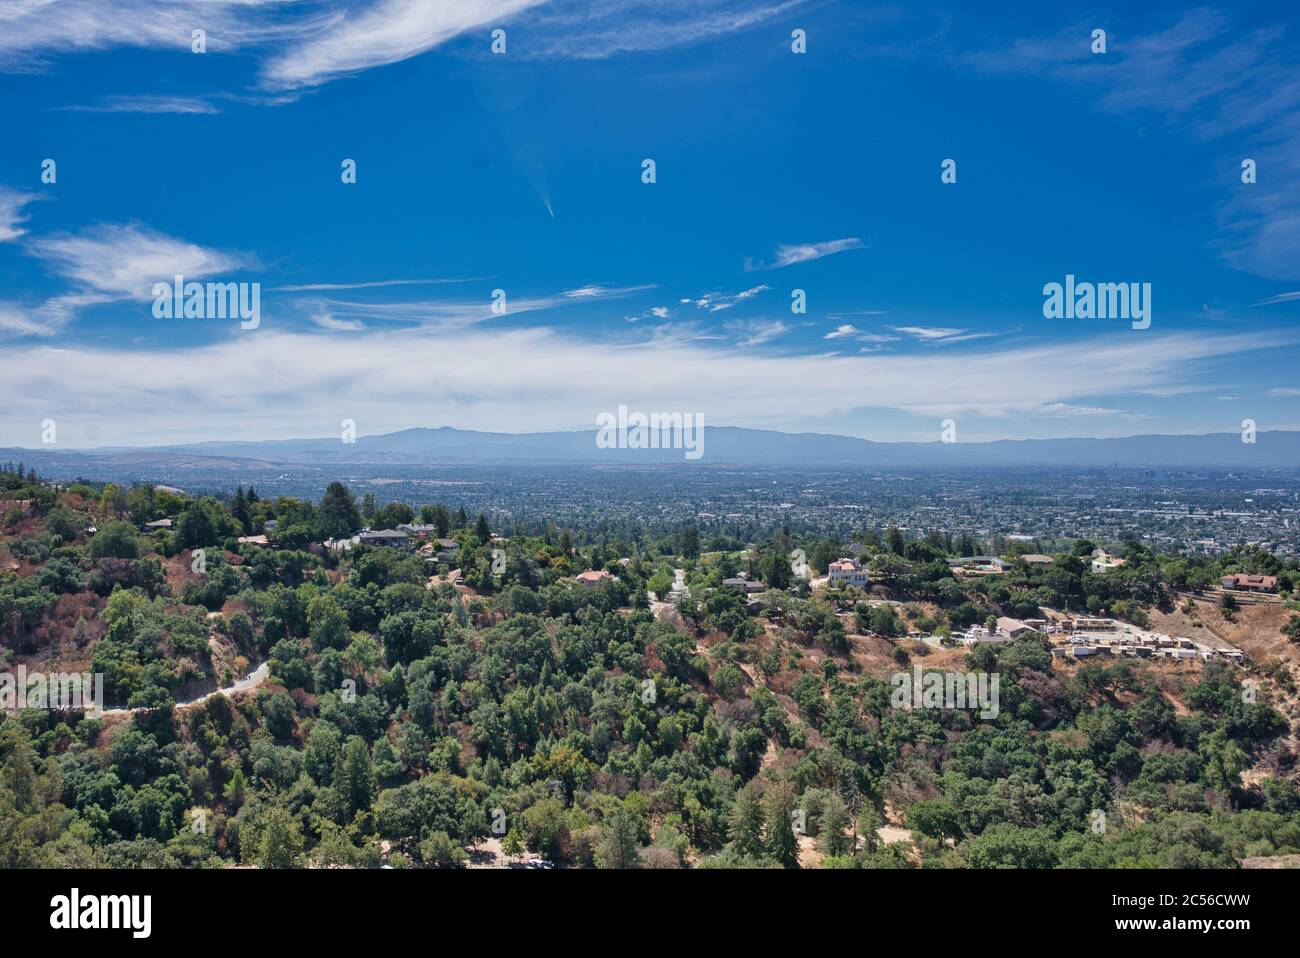 Aerial shot of the Griffith Park located in Los Angles, California during daylight Stock Photo